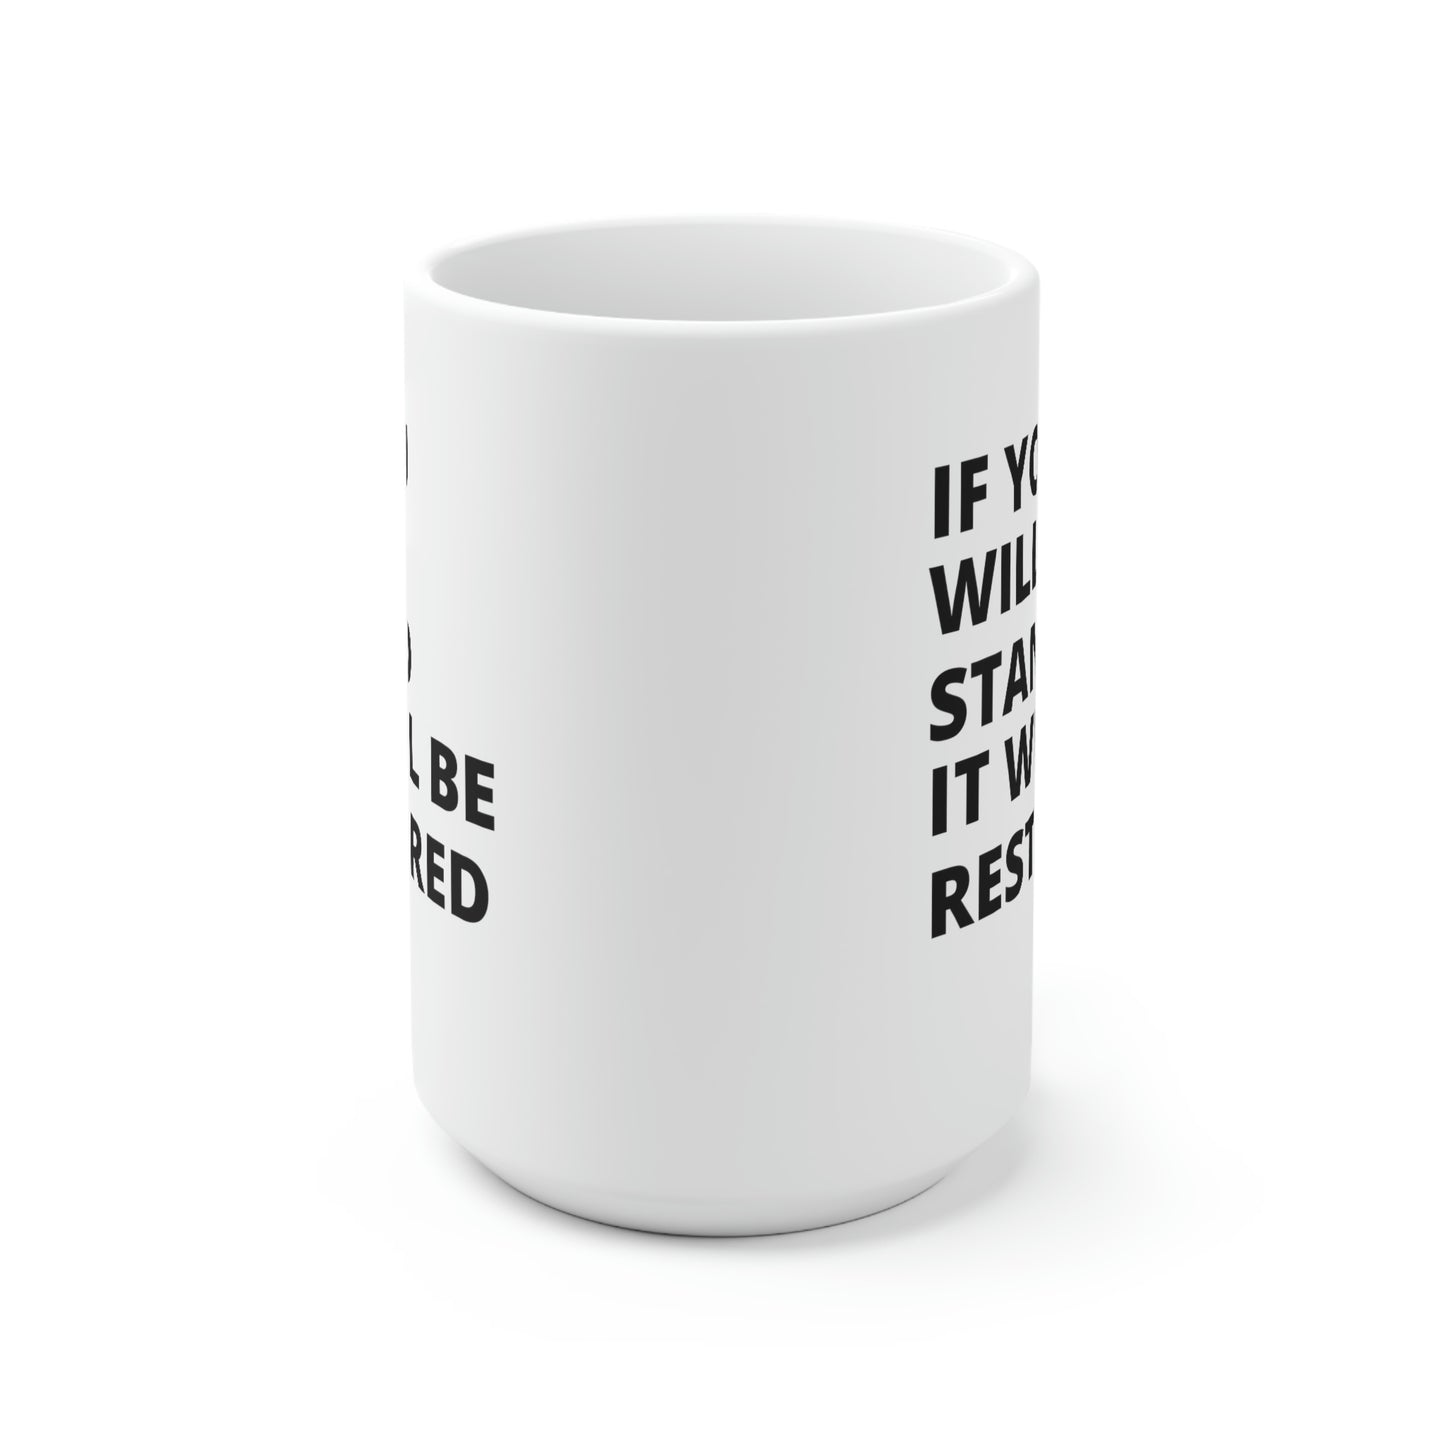 "If You Stand It Will Be Restored" Ceramic Mug